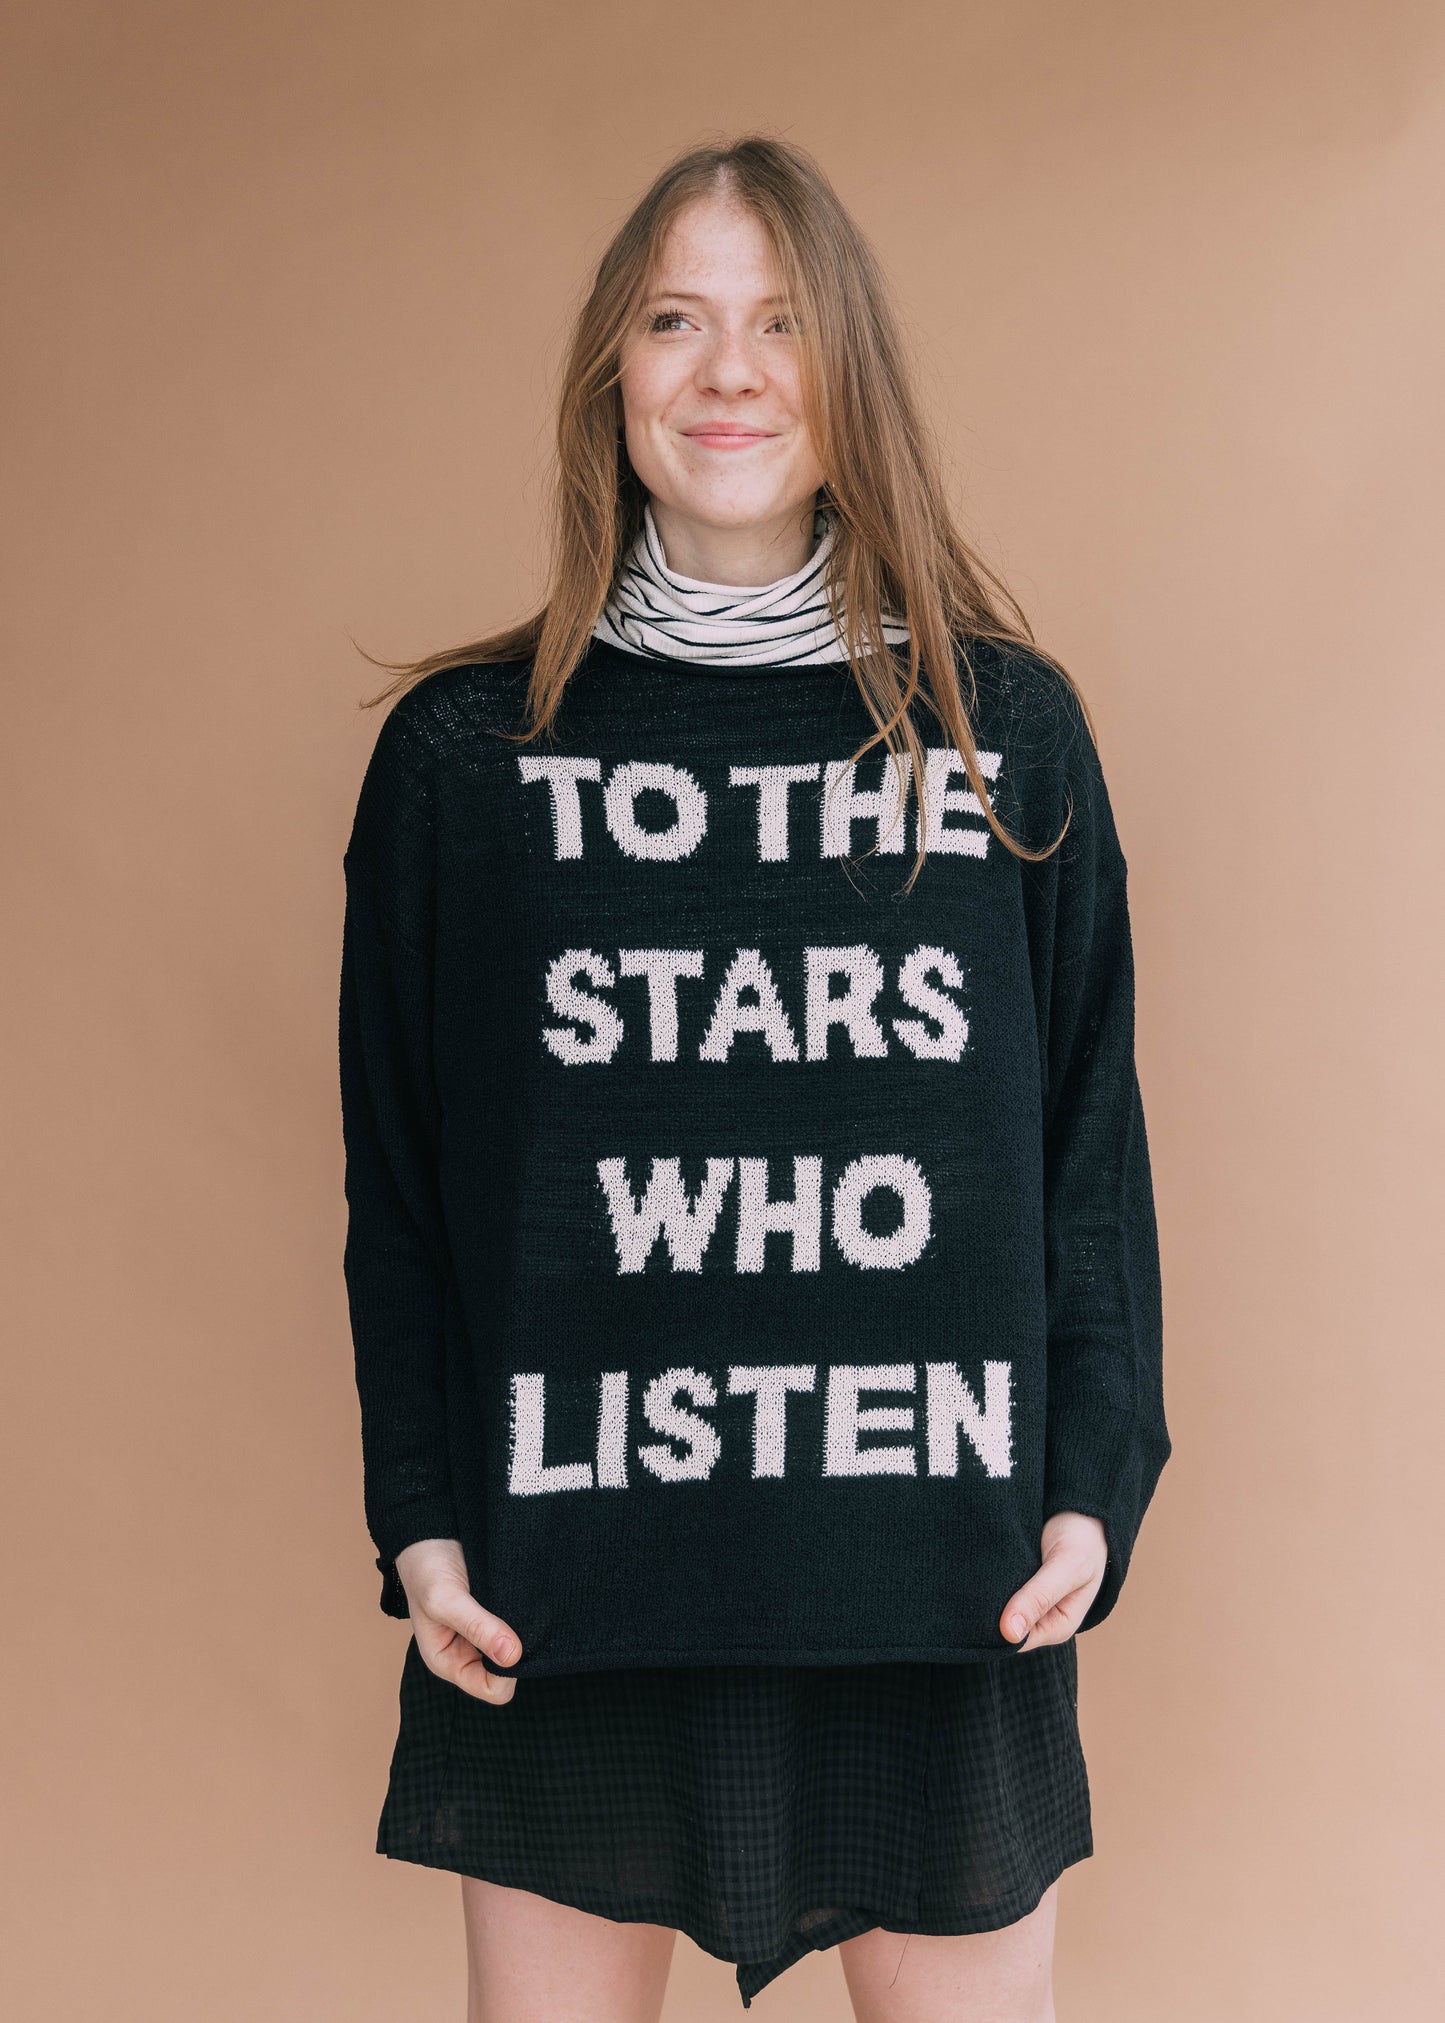 to the stars sweater